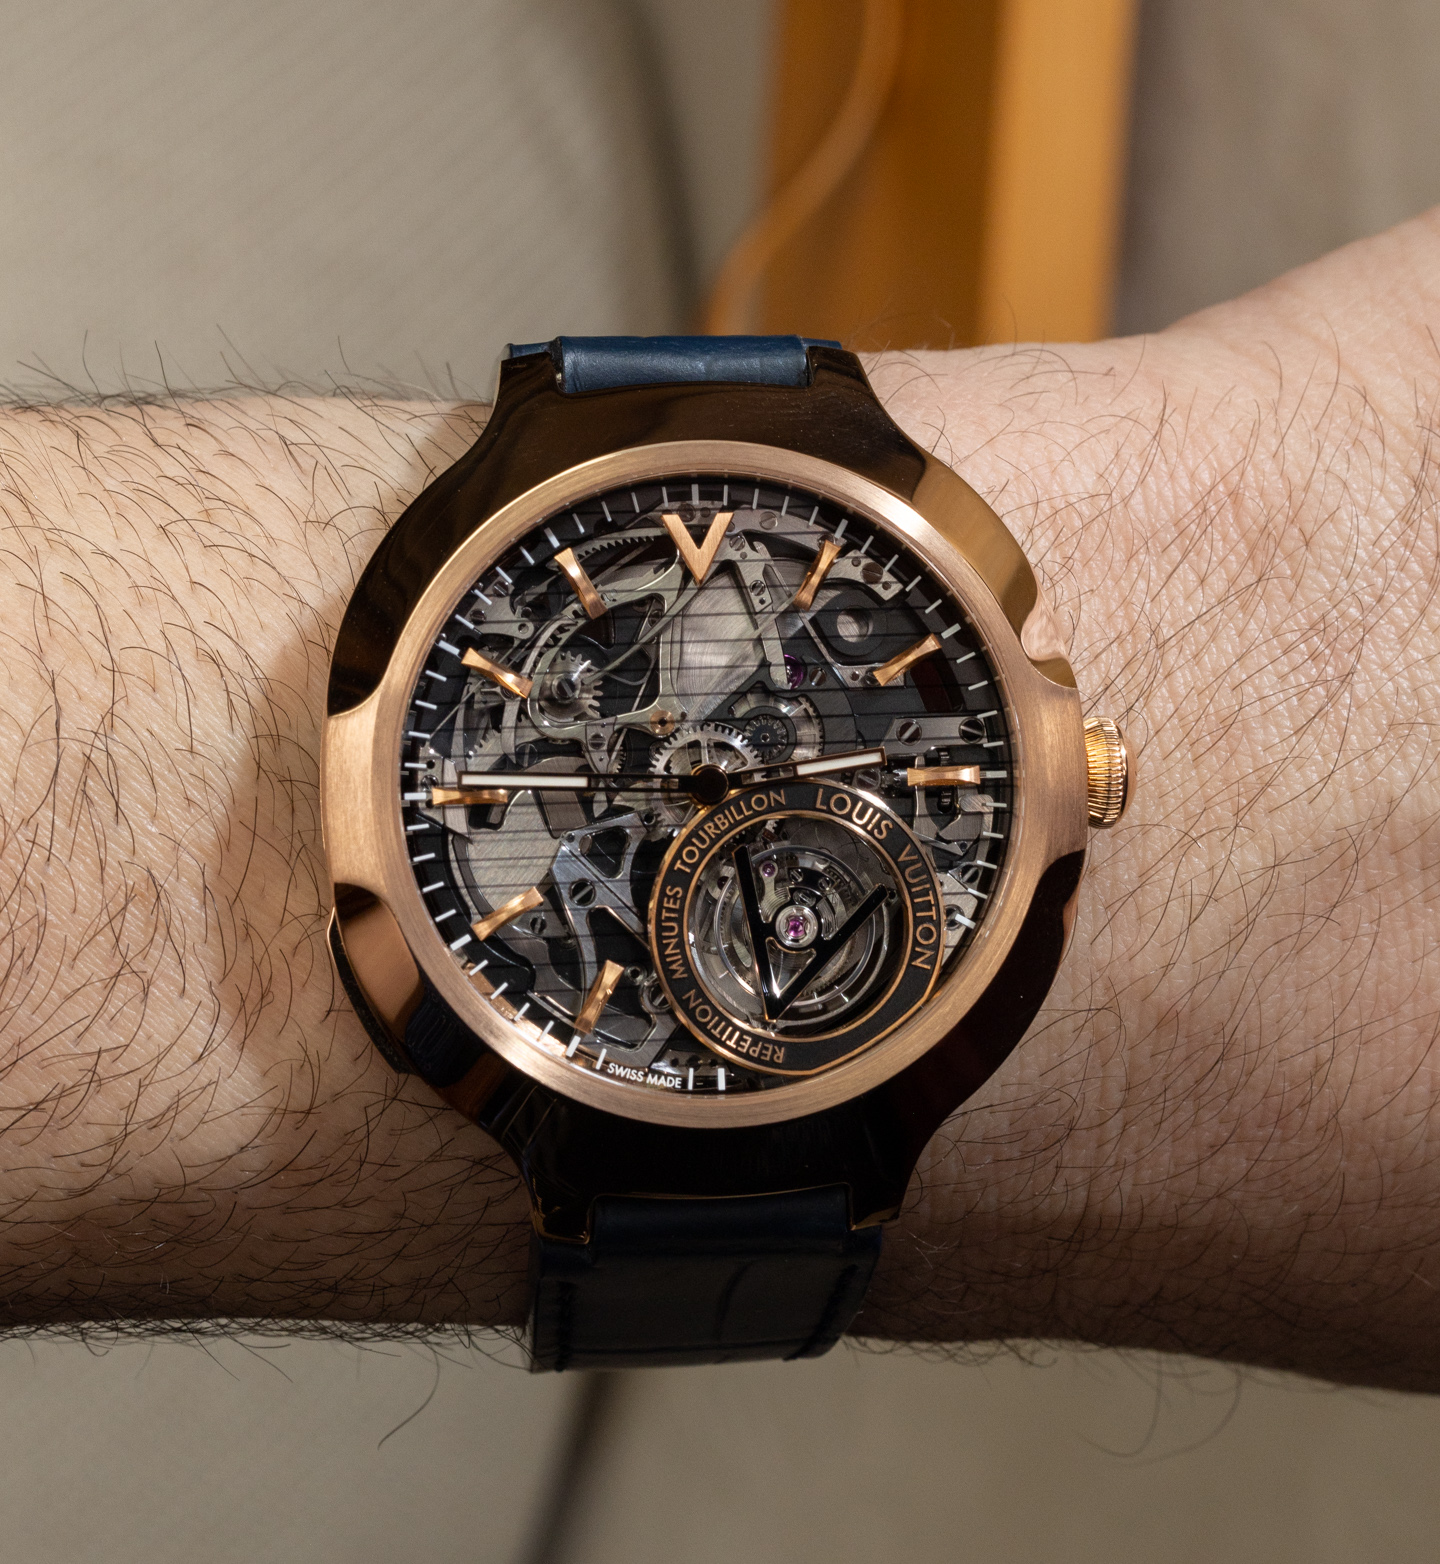 vuitton voyager minute repeater flying